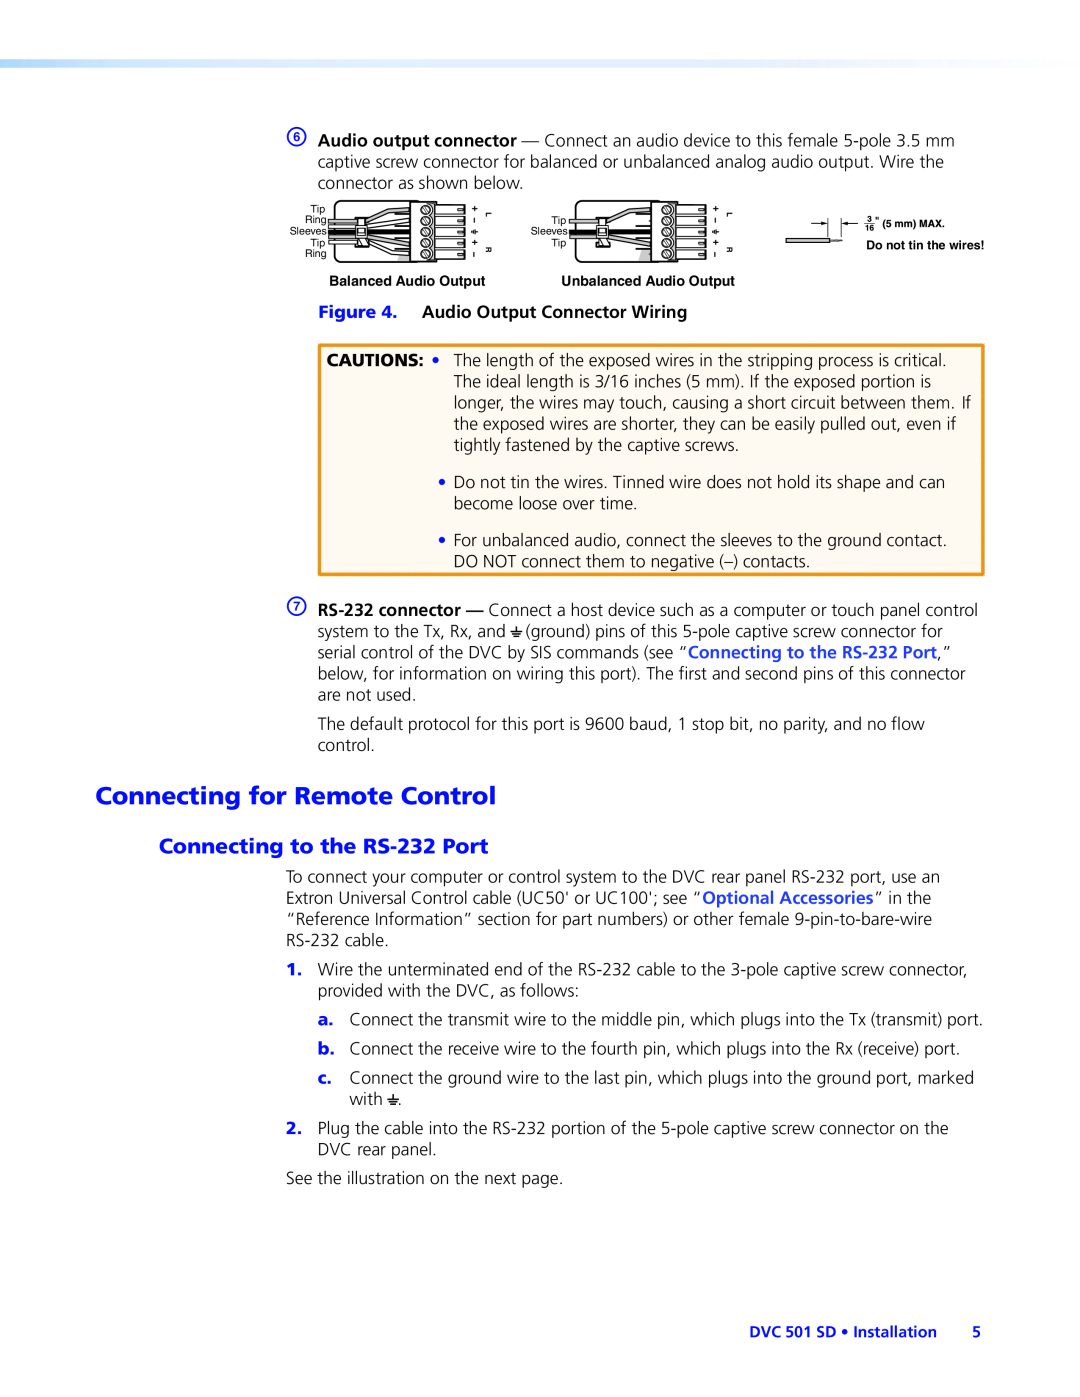 Extron electronic DVC501SD manual Connecting for Remote Control, Connecting to the RS-232Port 